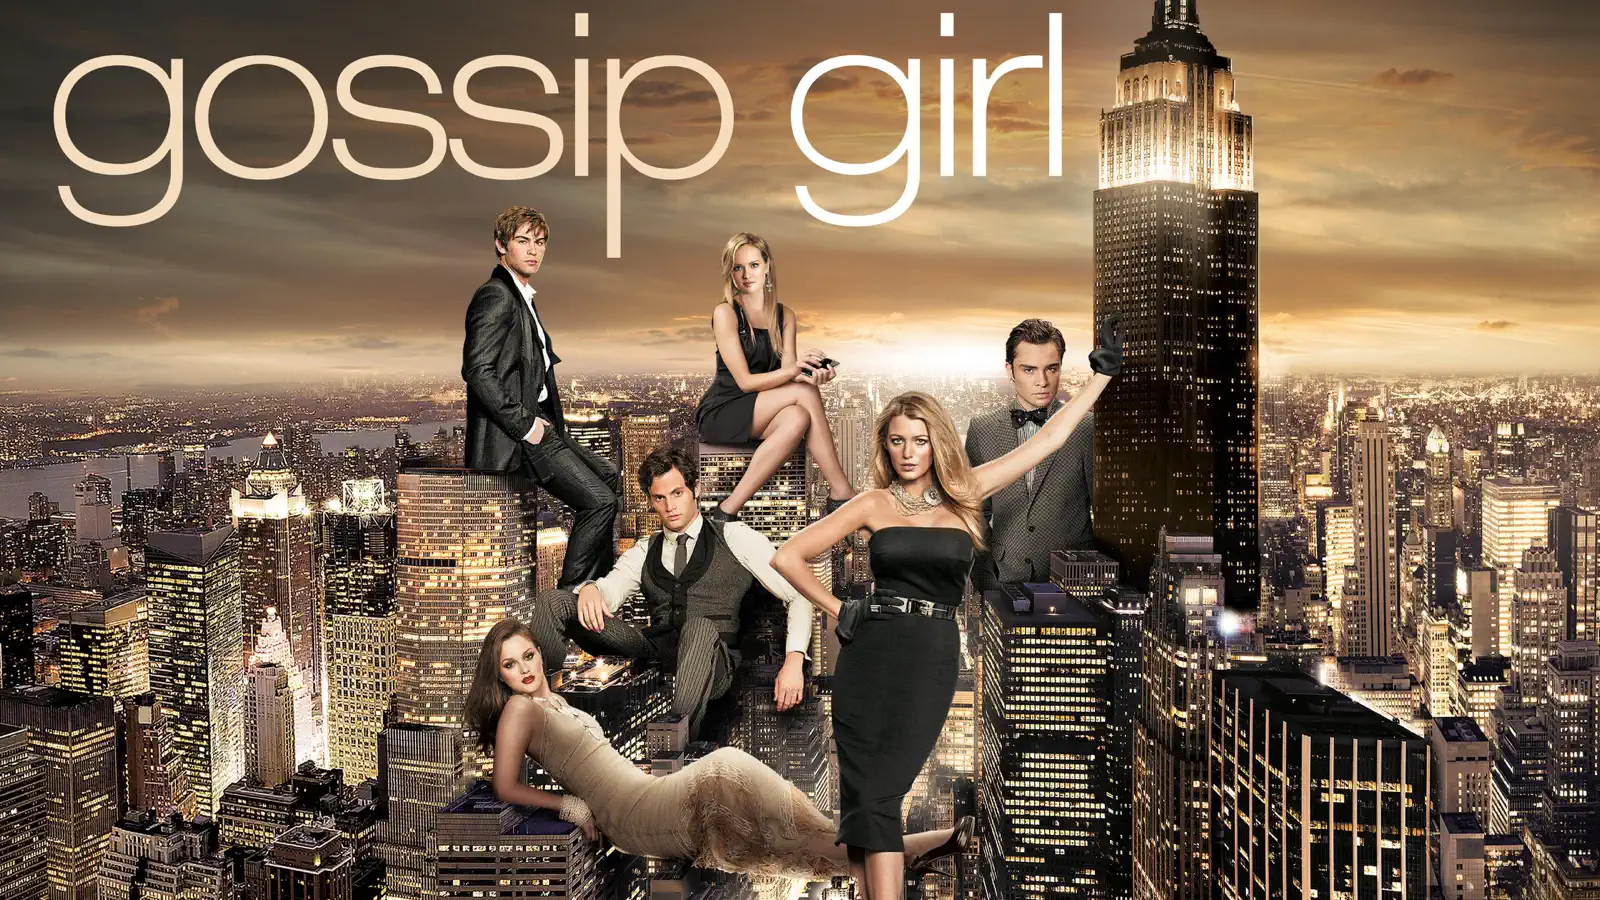 Gossip Girl; a TV show of the 2000s